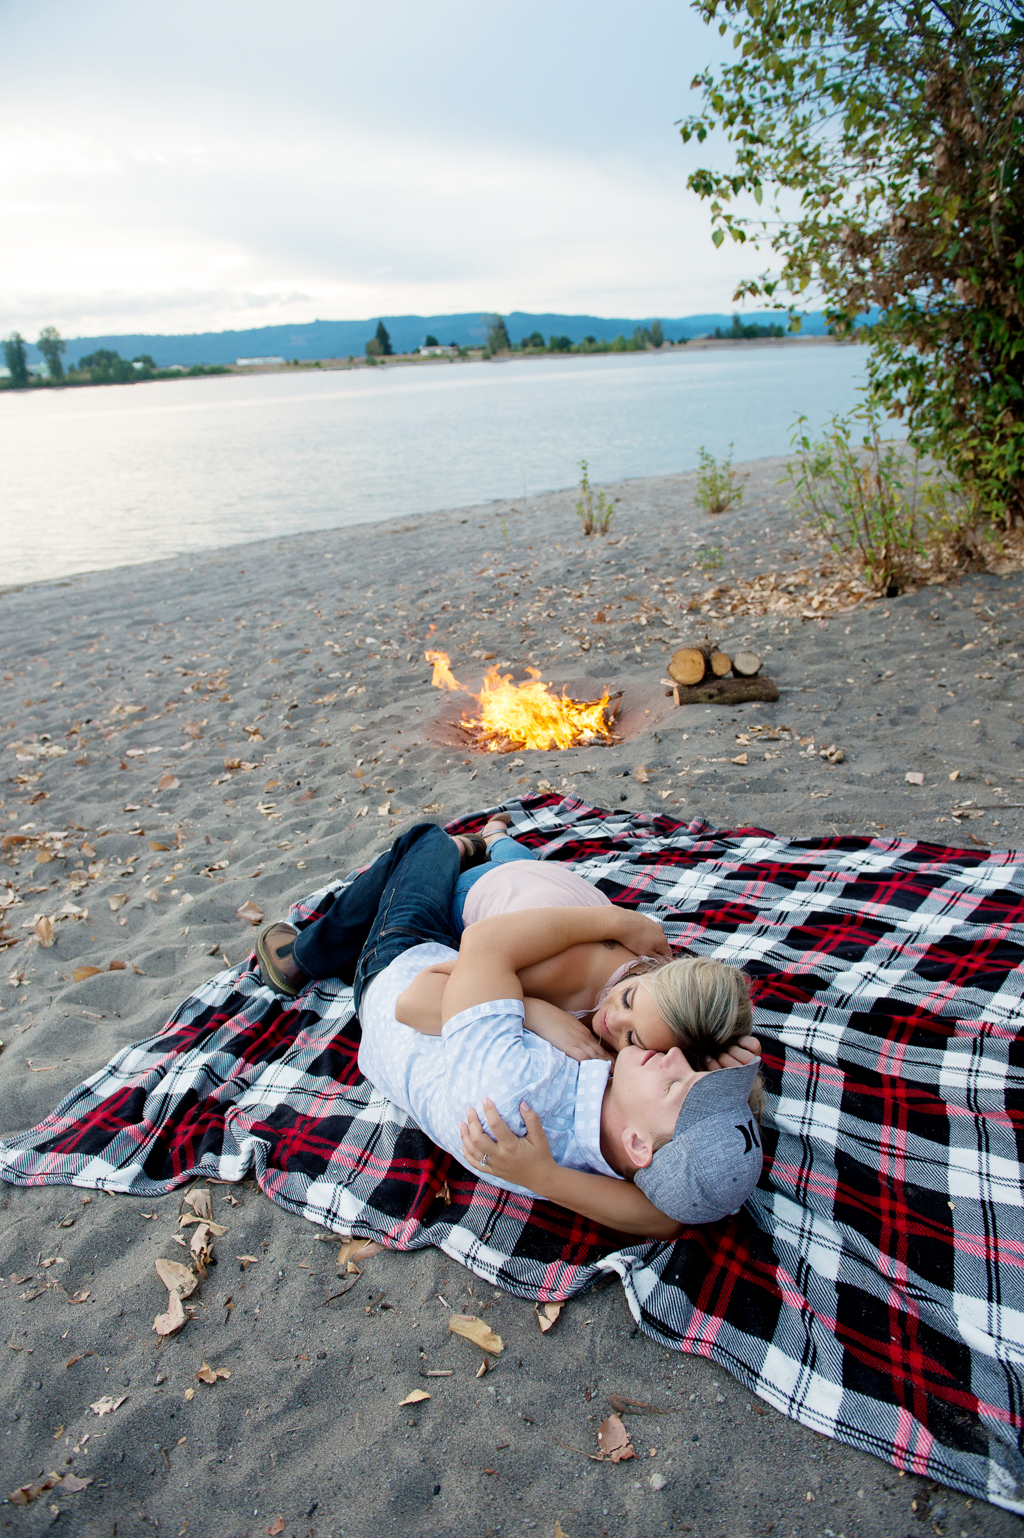 a man and woman cuddle on a plaid blanket on the beach next to a river with a campfire